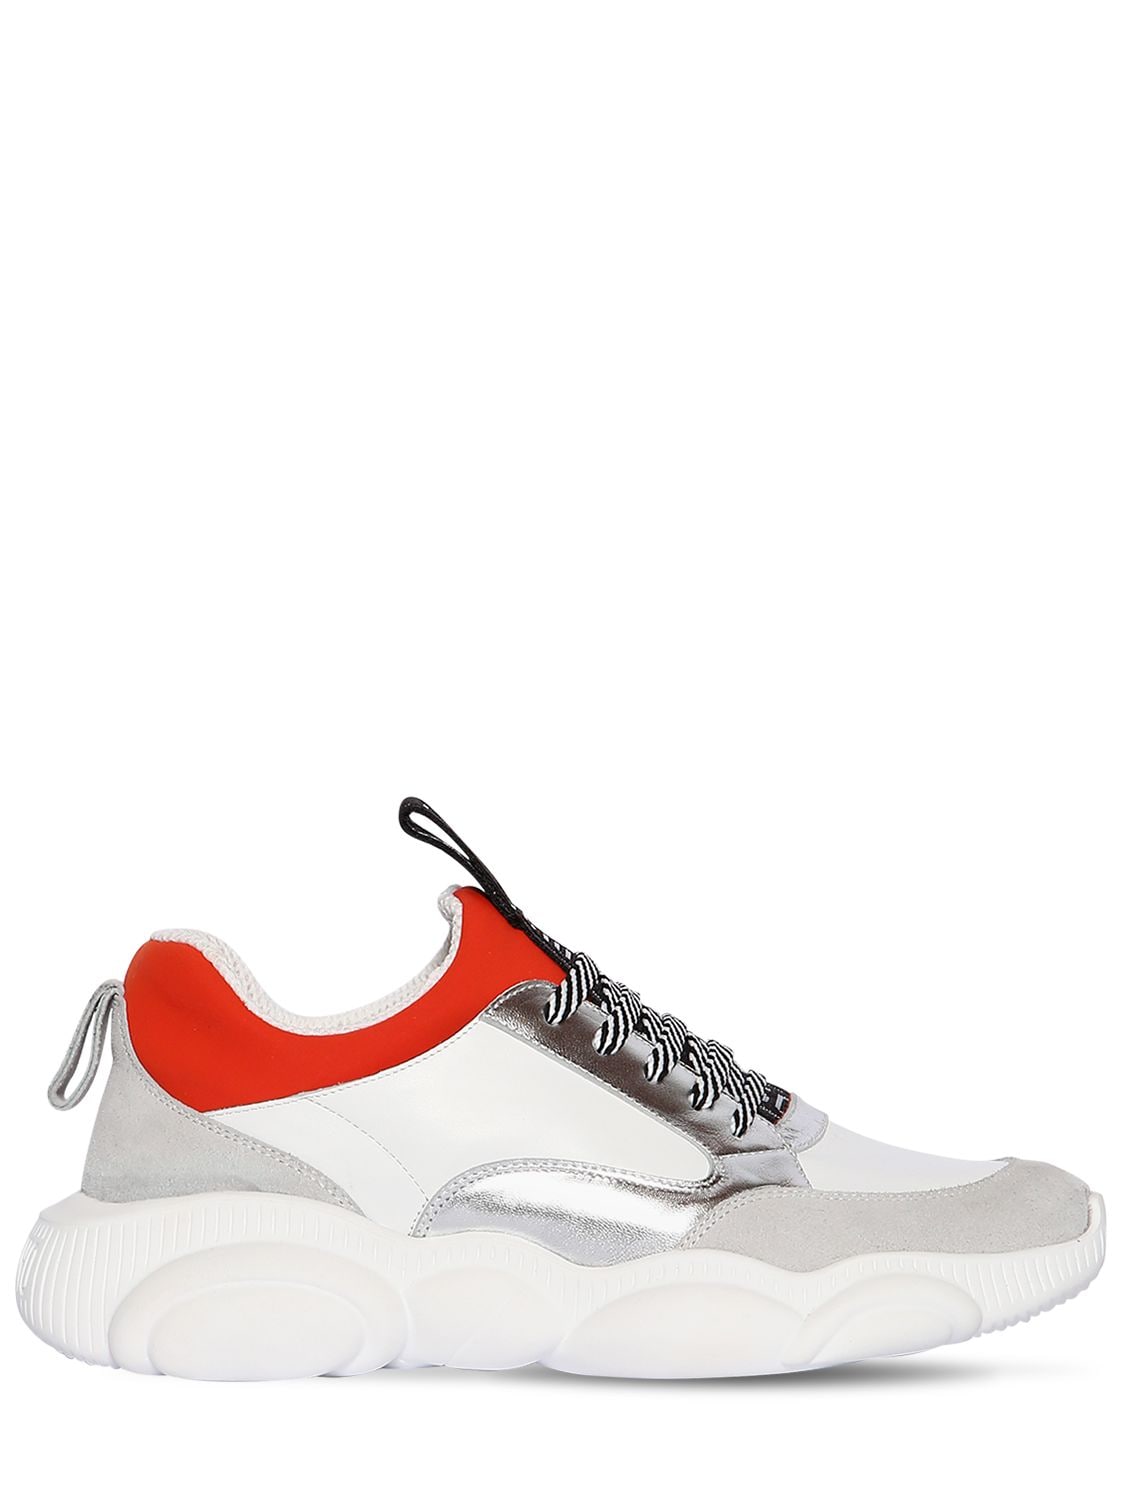 Moschino Leather & Neoprene Sneakers In White